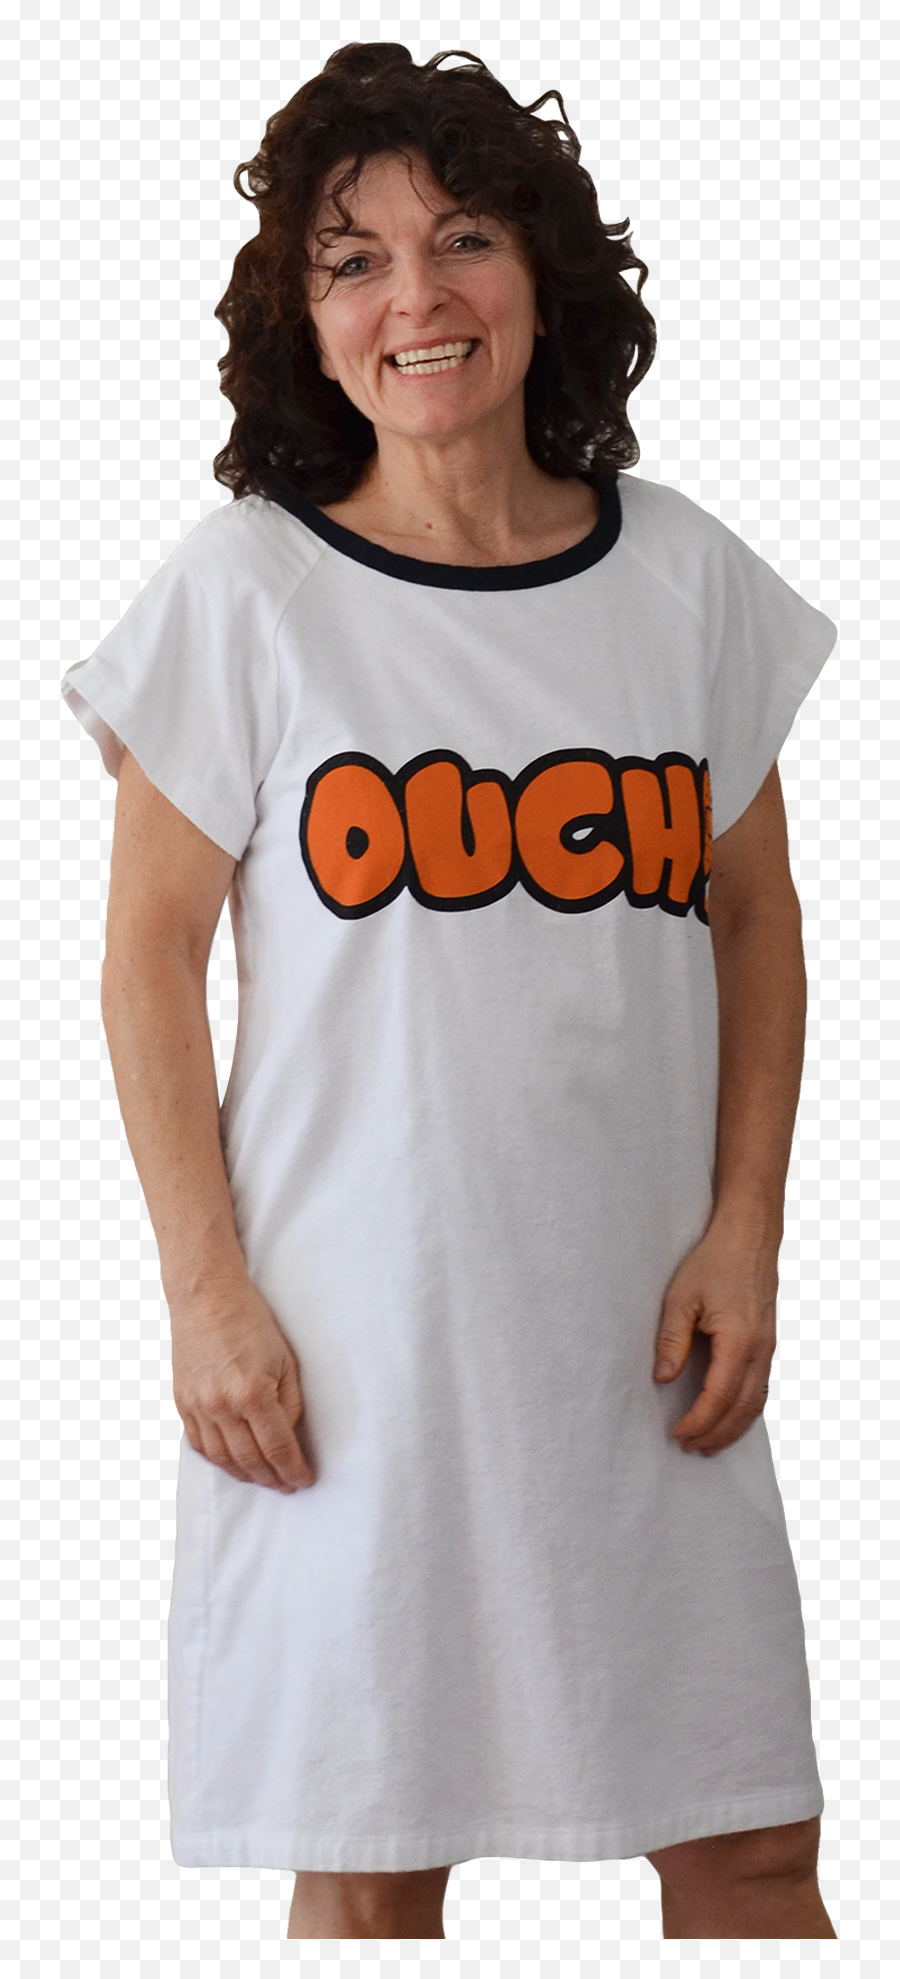 Ouch - Basic Dress Png,Ouch Png